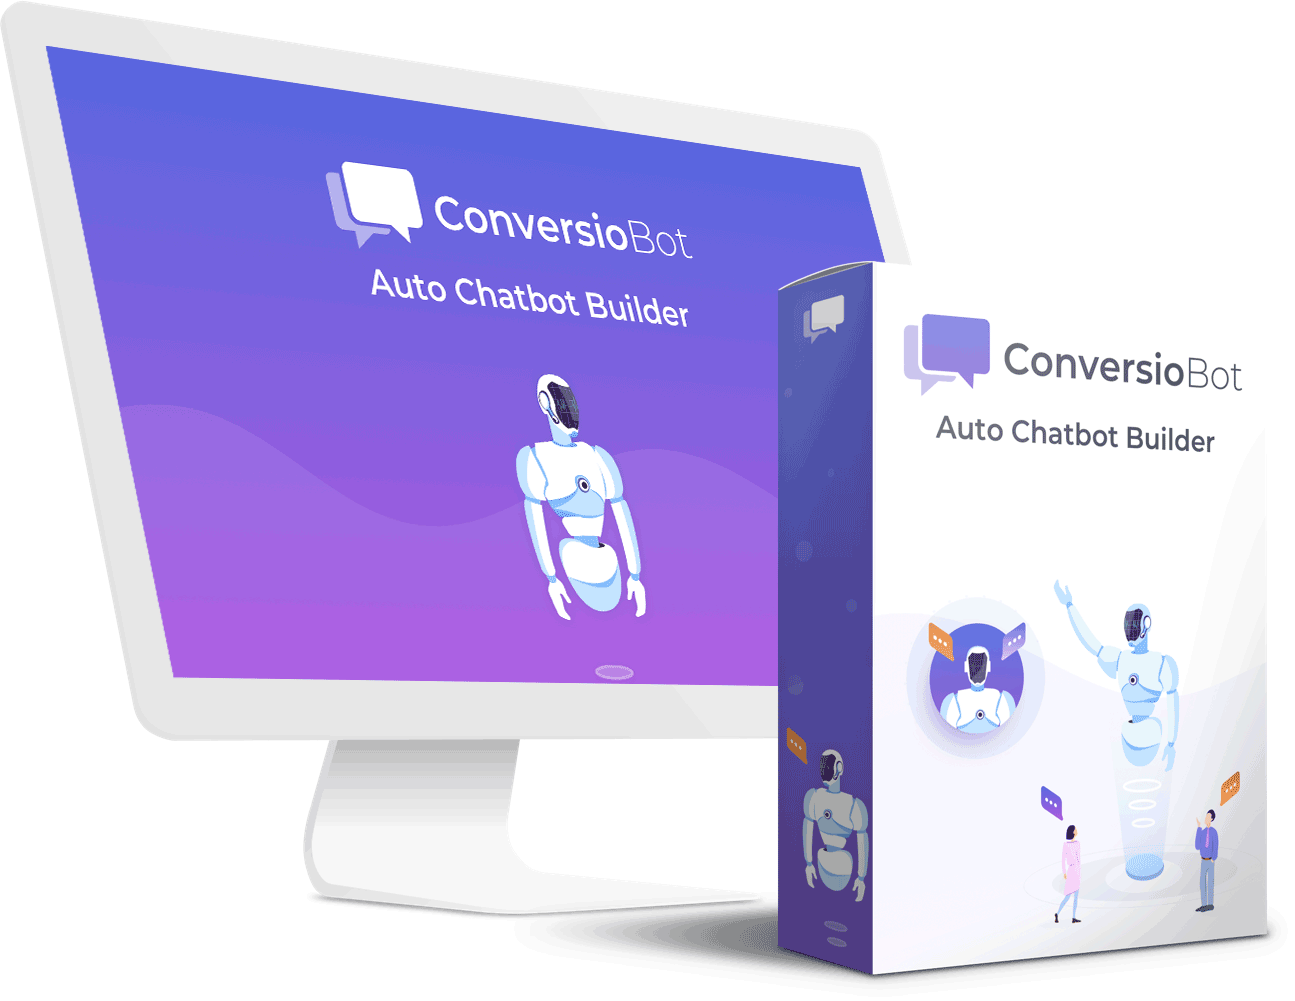 ConversioBot – ONE Line Of “Automated Bot Code” To Exploit a NEW AI ChatRobot